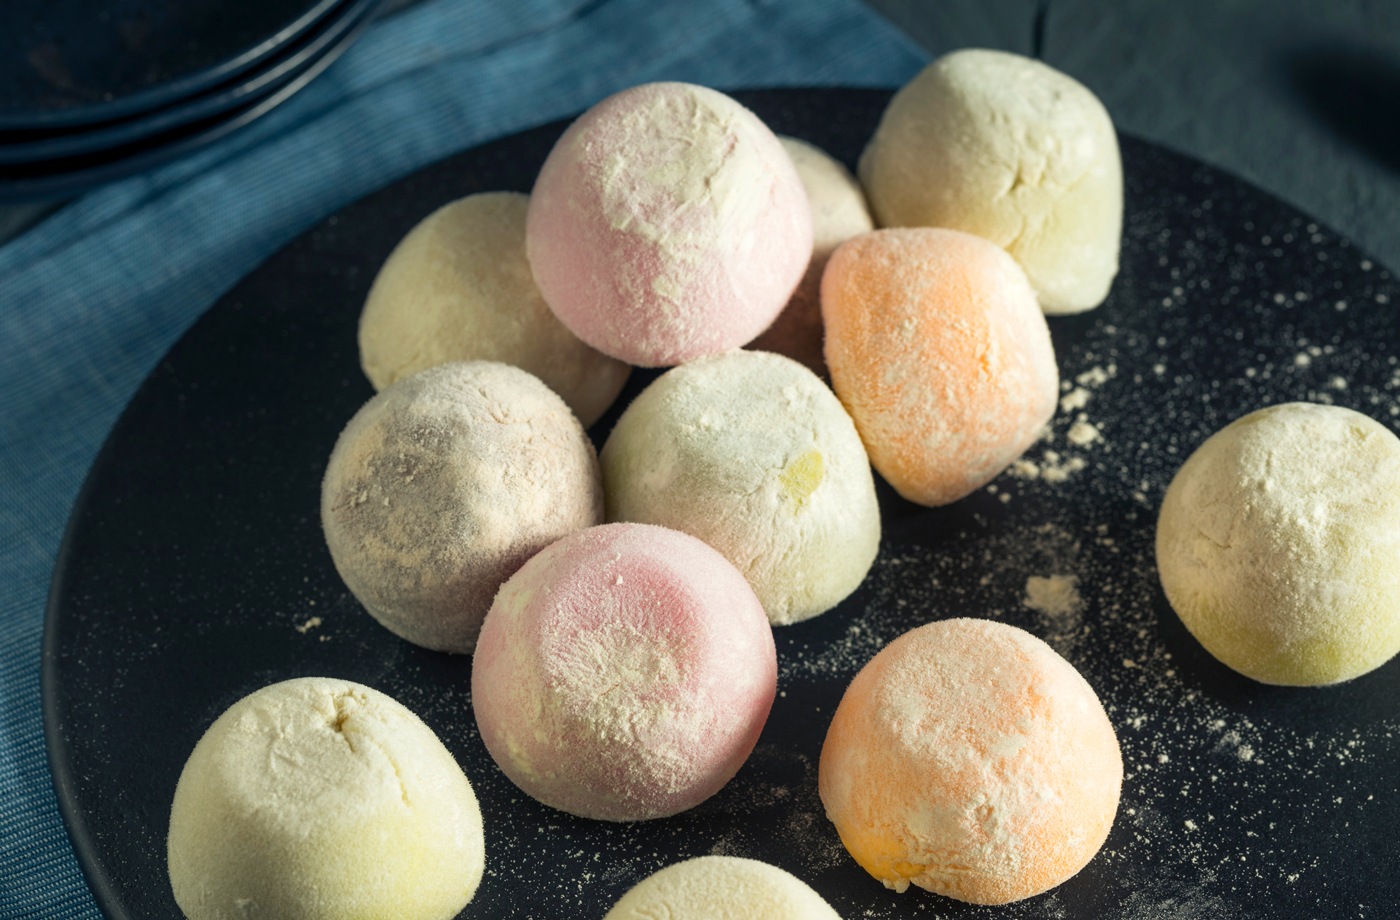 These new mini mochi from Trader Joe's make for the perfect after-dinner treat